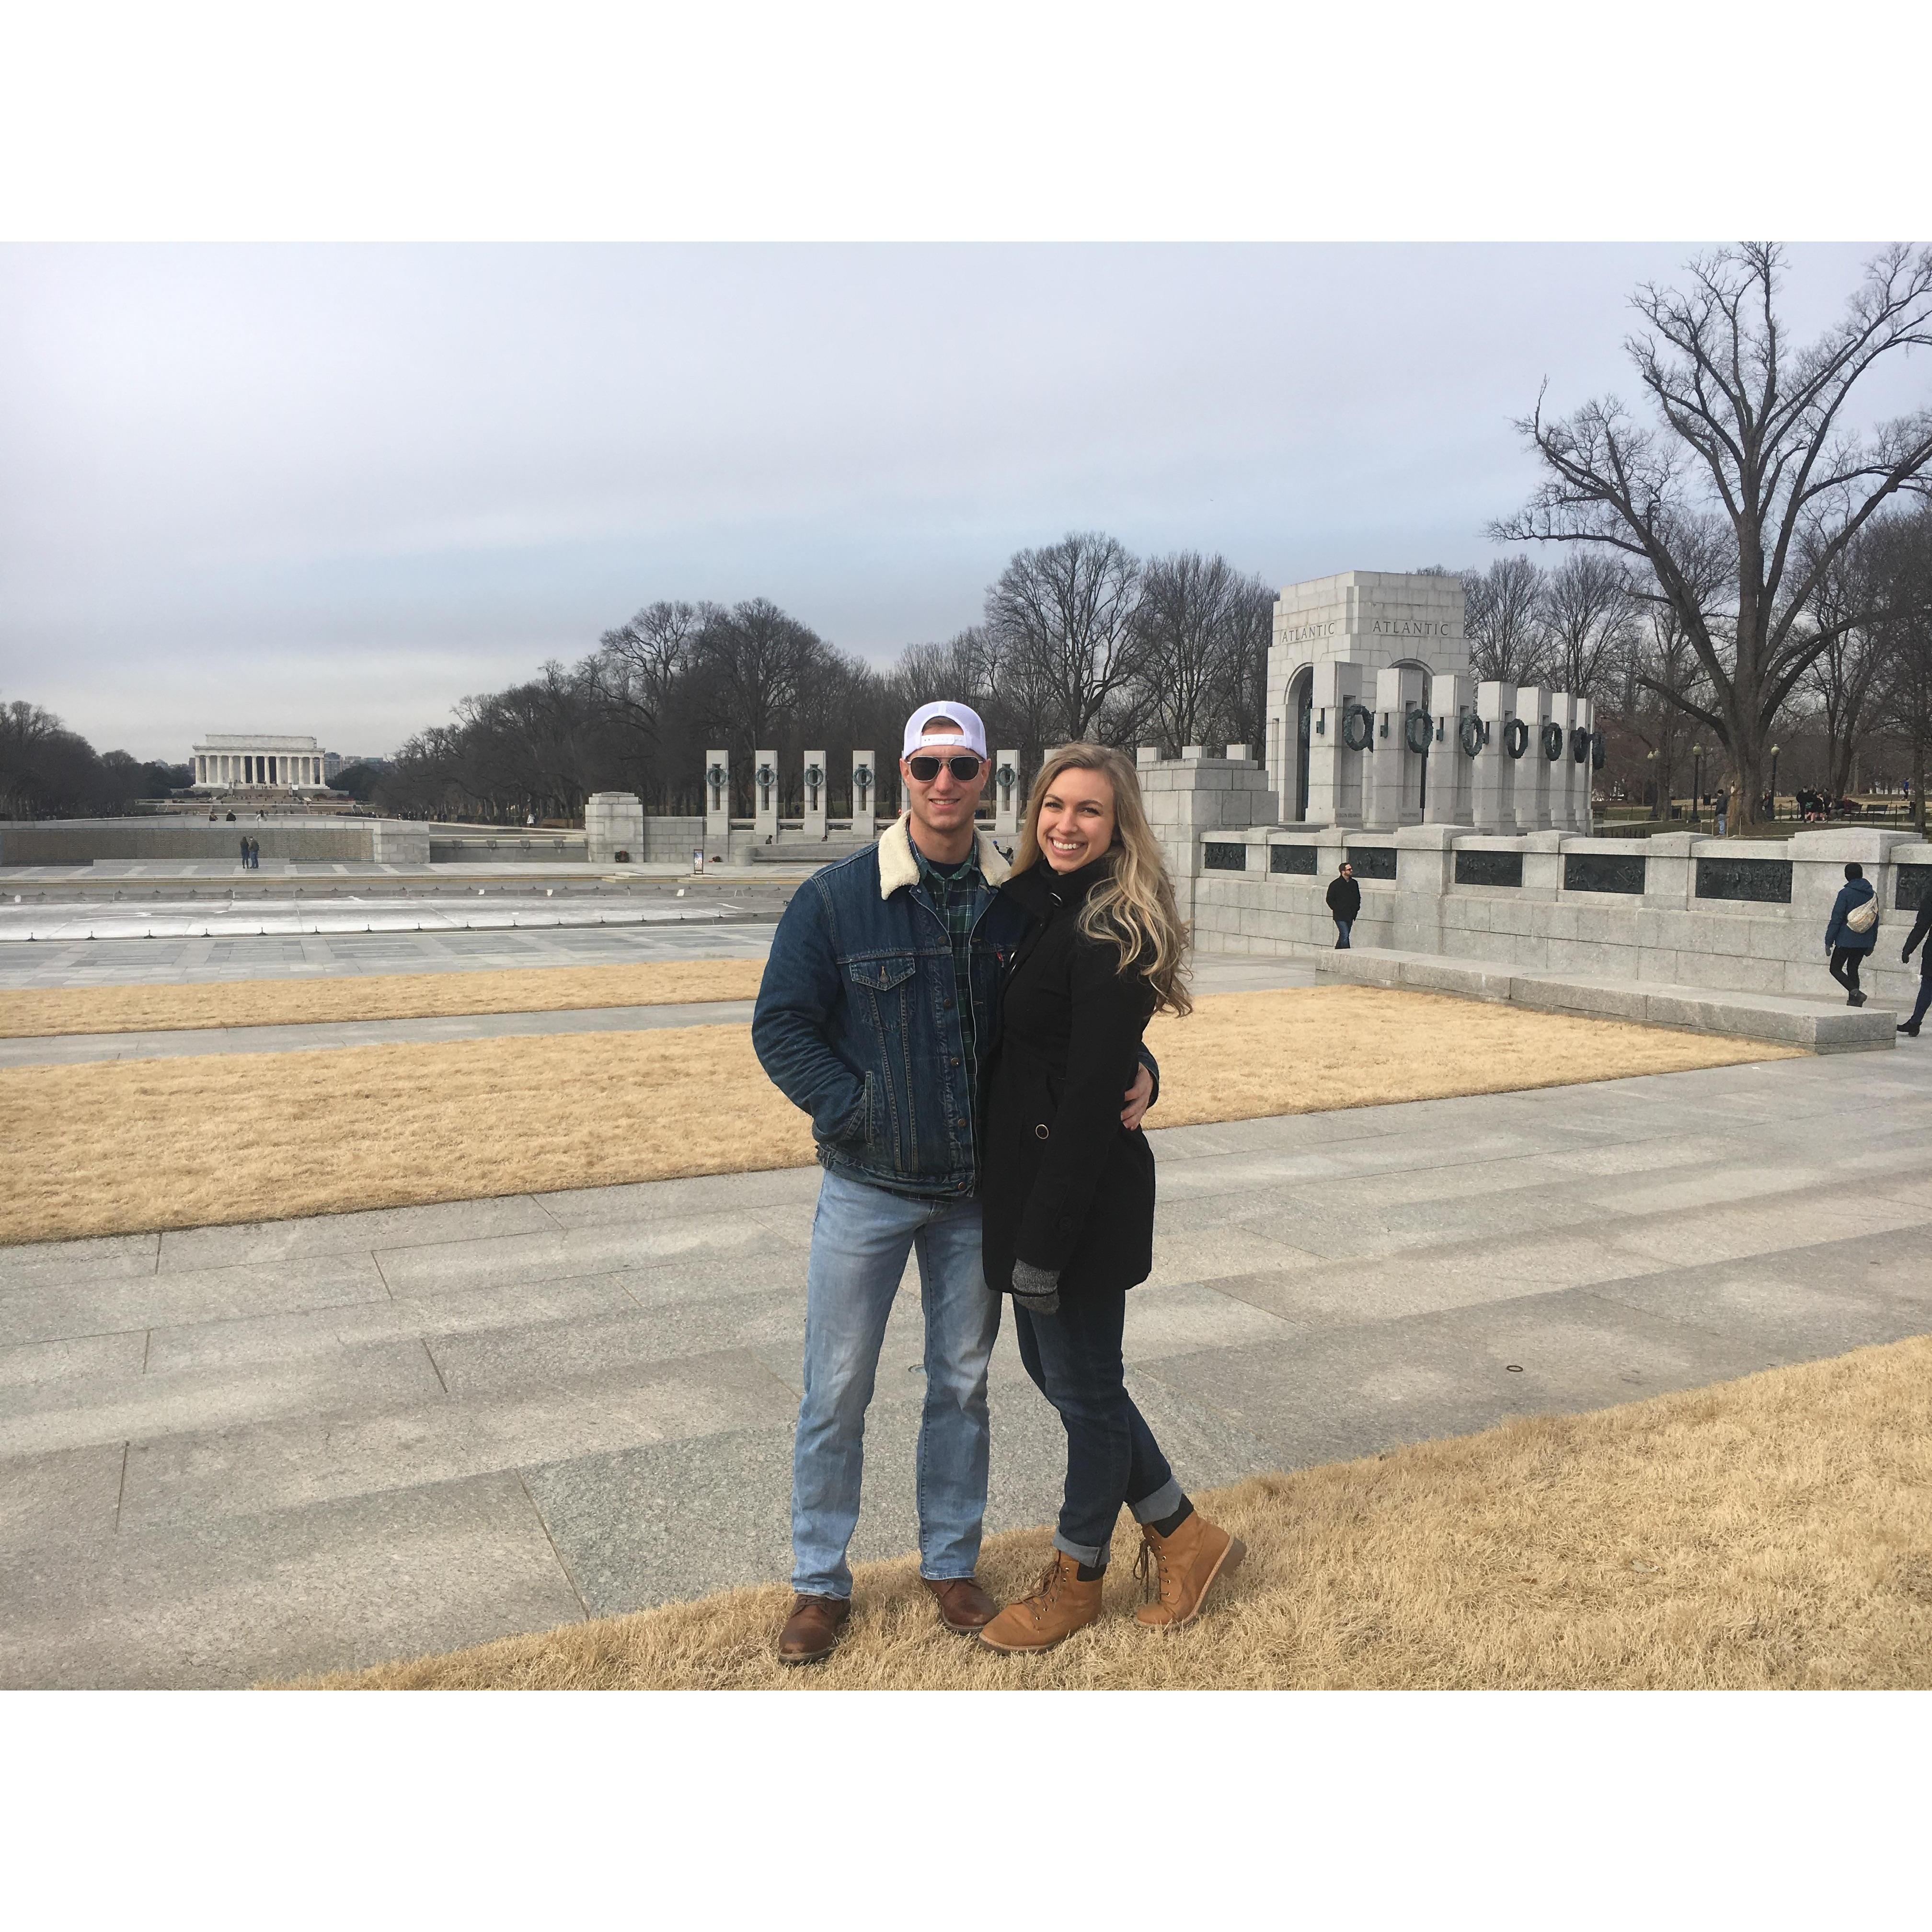 Showing off the National Mall.